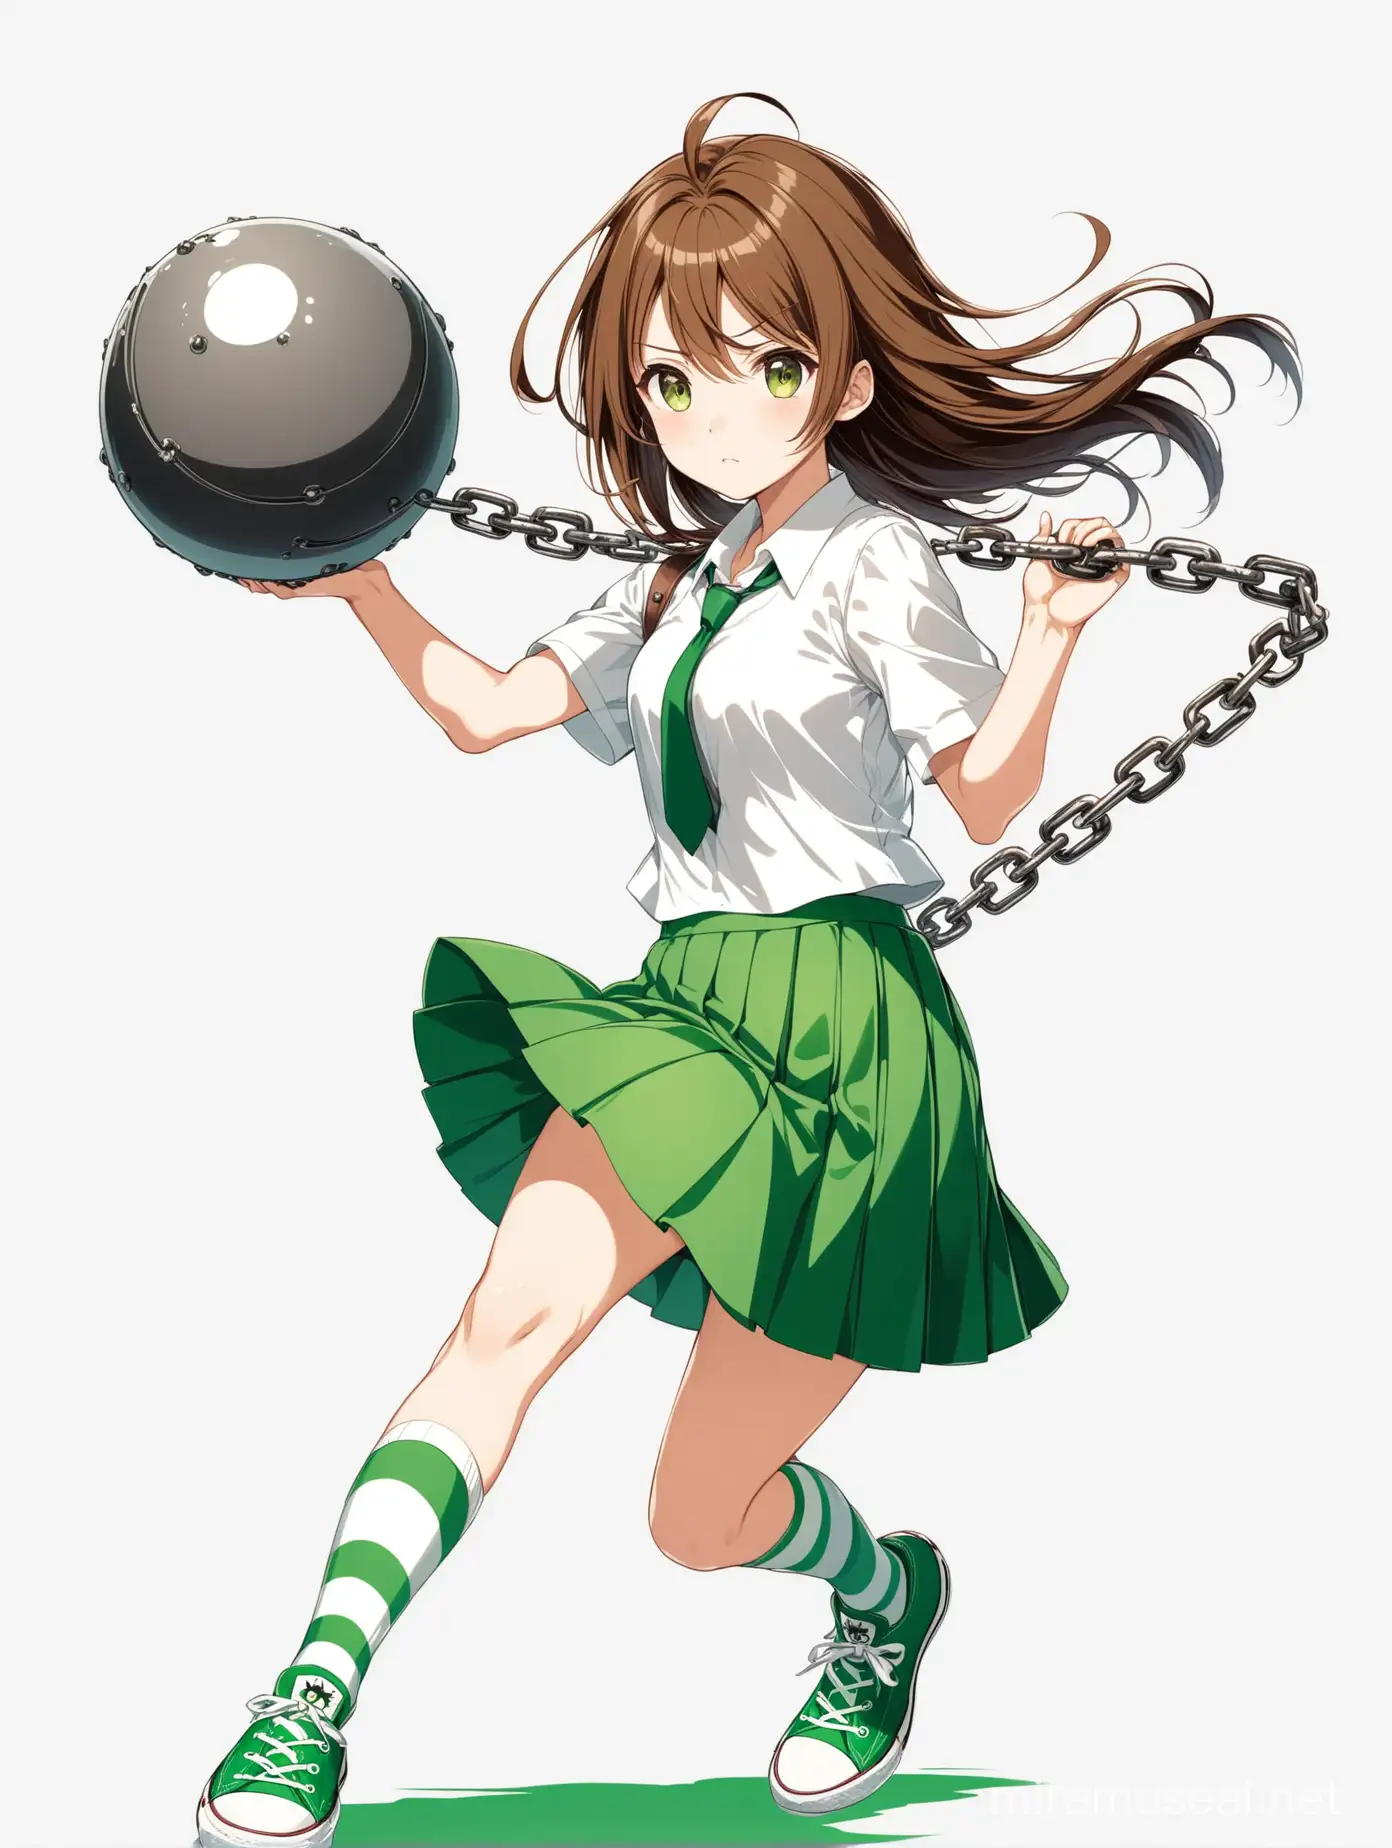 White background Anime A high school girl with brown hair and brown eyes. She wears a school uniform, which consists of a white top, a green tie, a green skirt with white stripes, long green socks, and green Converse shoes. She carries a weapon containing a chain with an iron ball at its head.